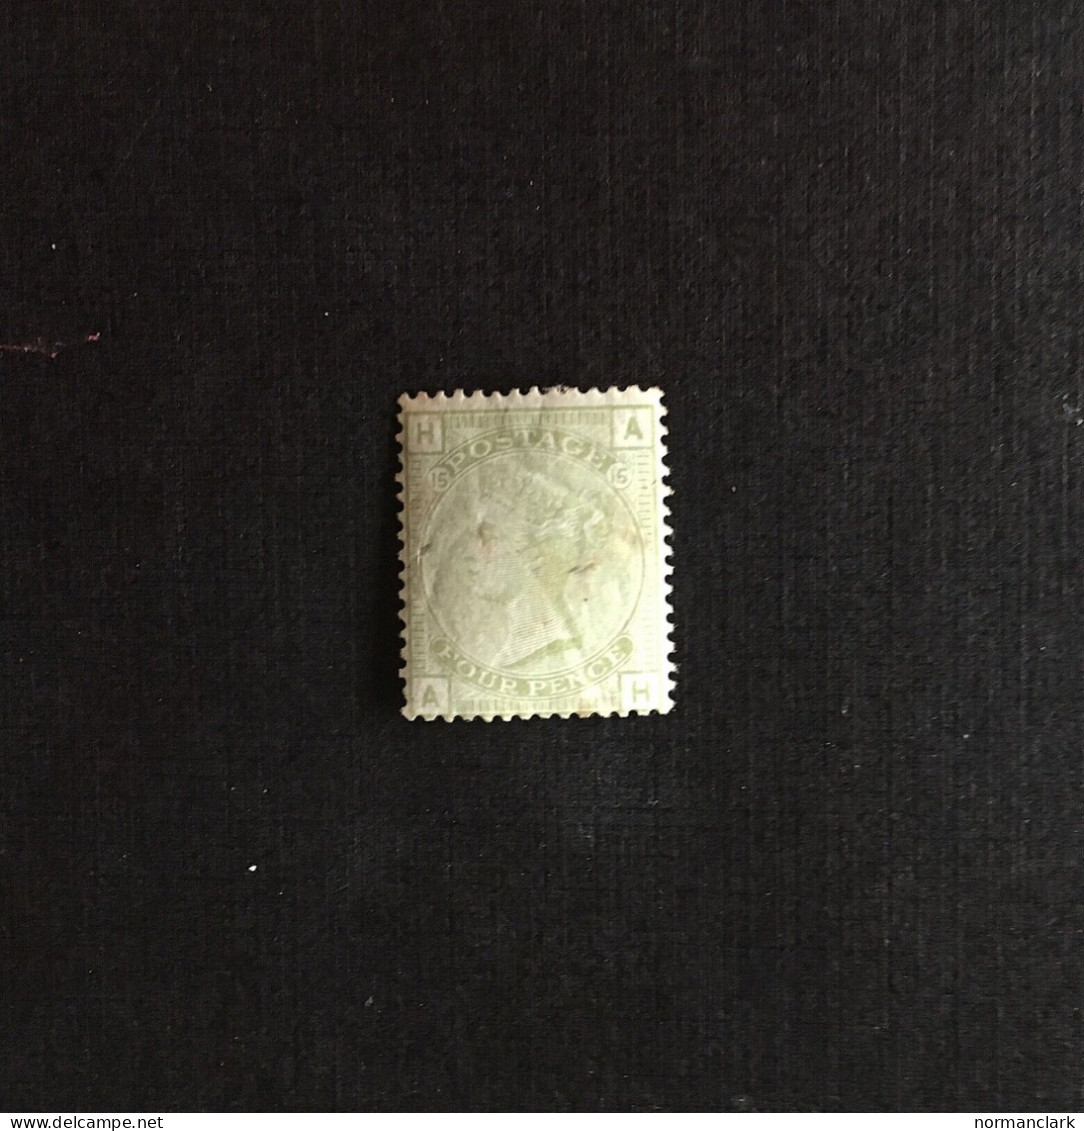 GB 1877 4d SAGE GREEN PLATE 15  SG 153 MINT PART GUM FINE LOOKING COPY RARE (1) - Unused Stamps